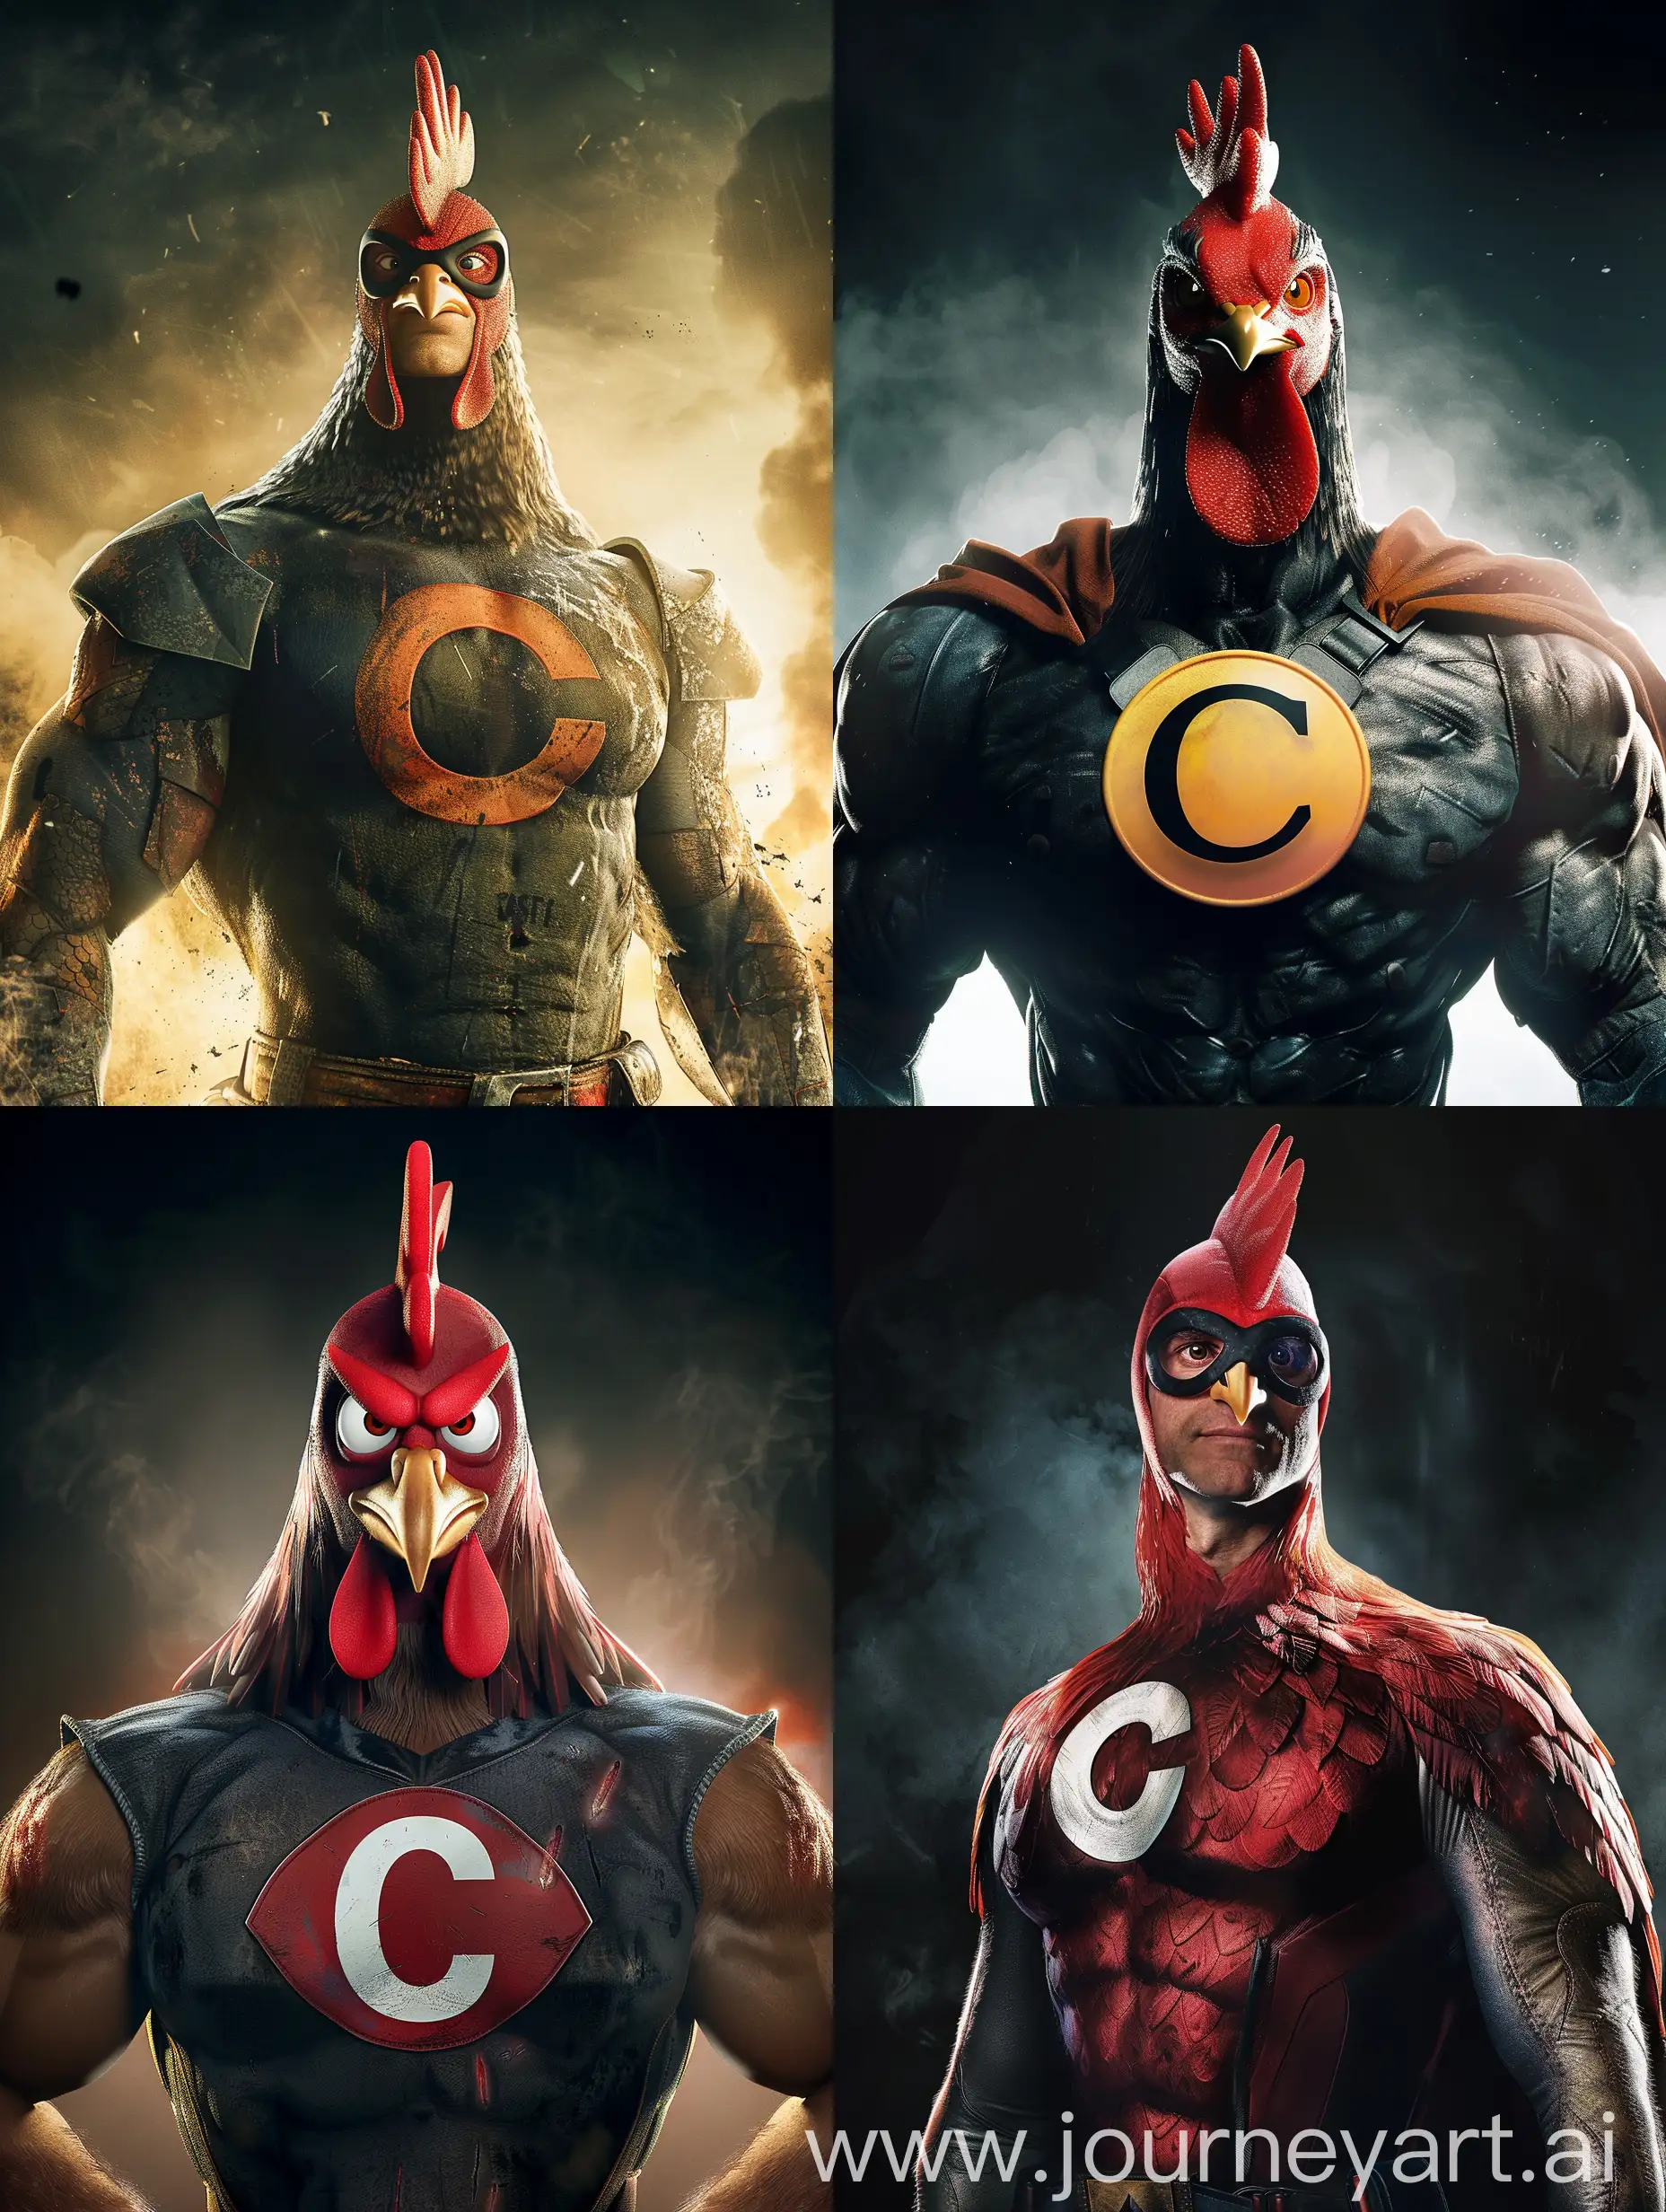 a movie poster for the super hero The Content Cockerel with a big C on his chest